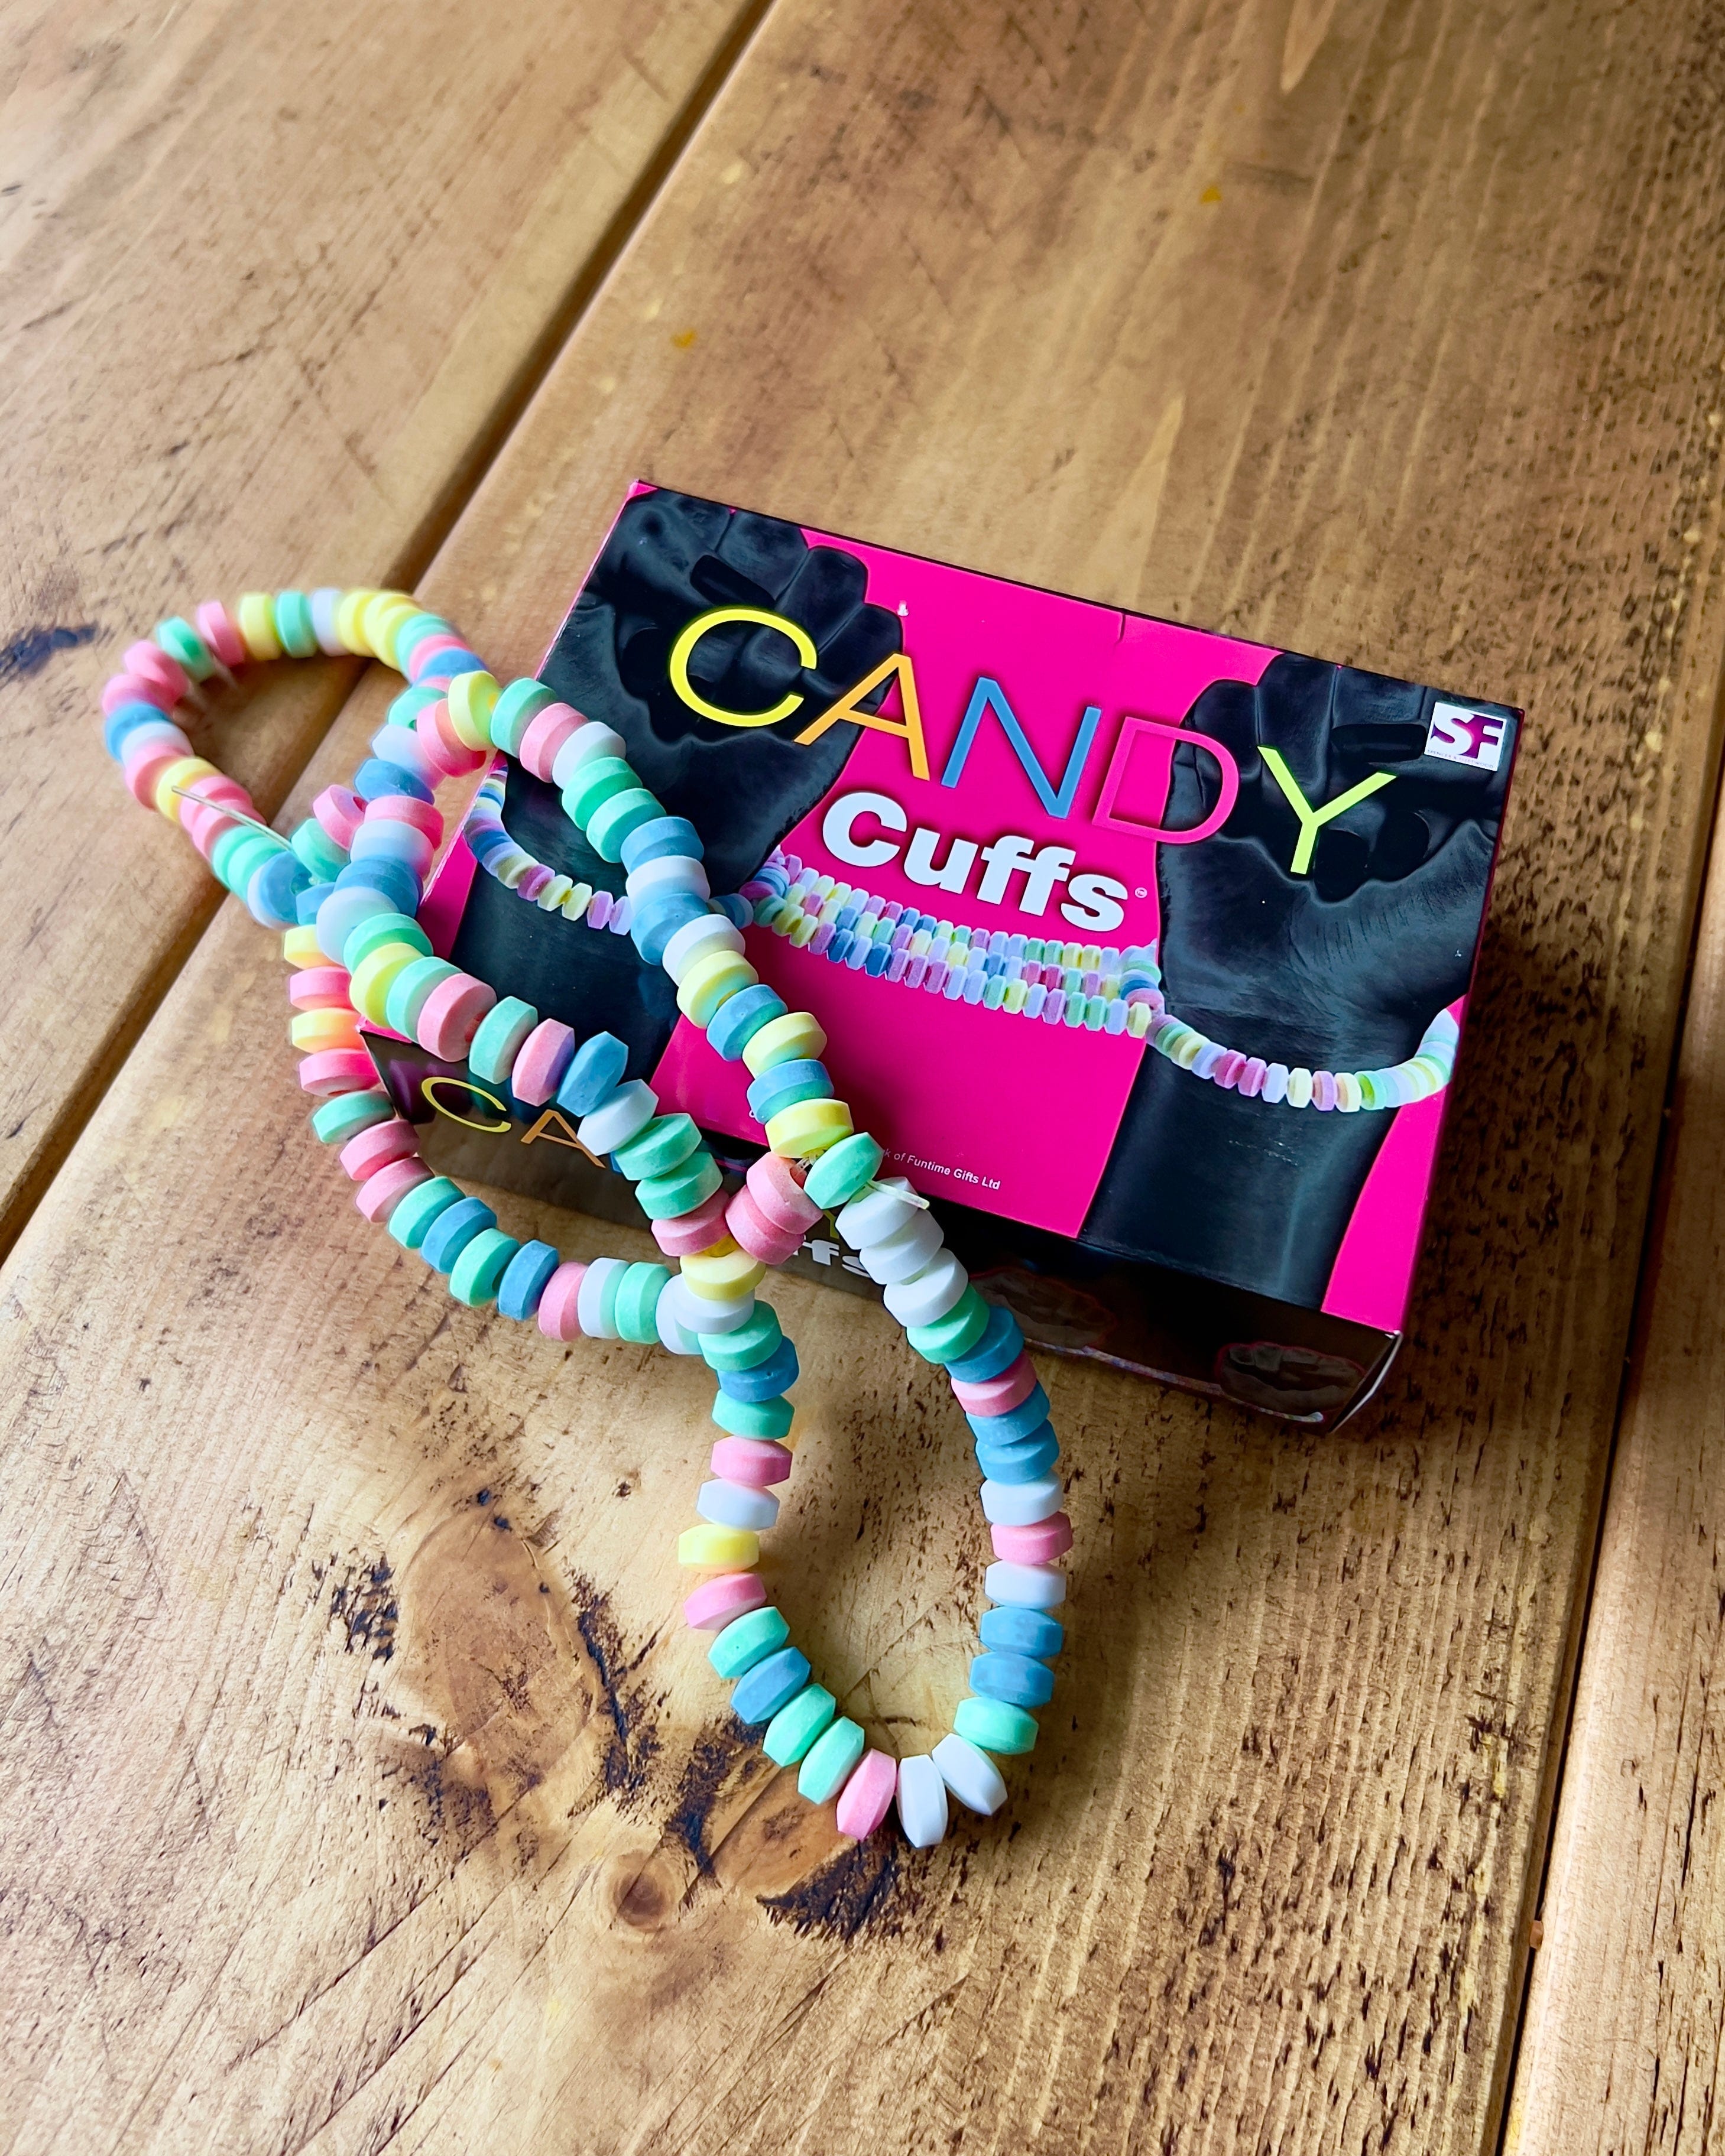 Candy cuffs - out of the box